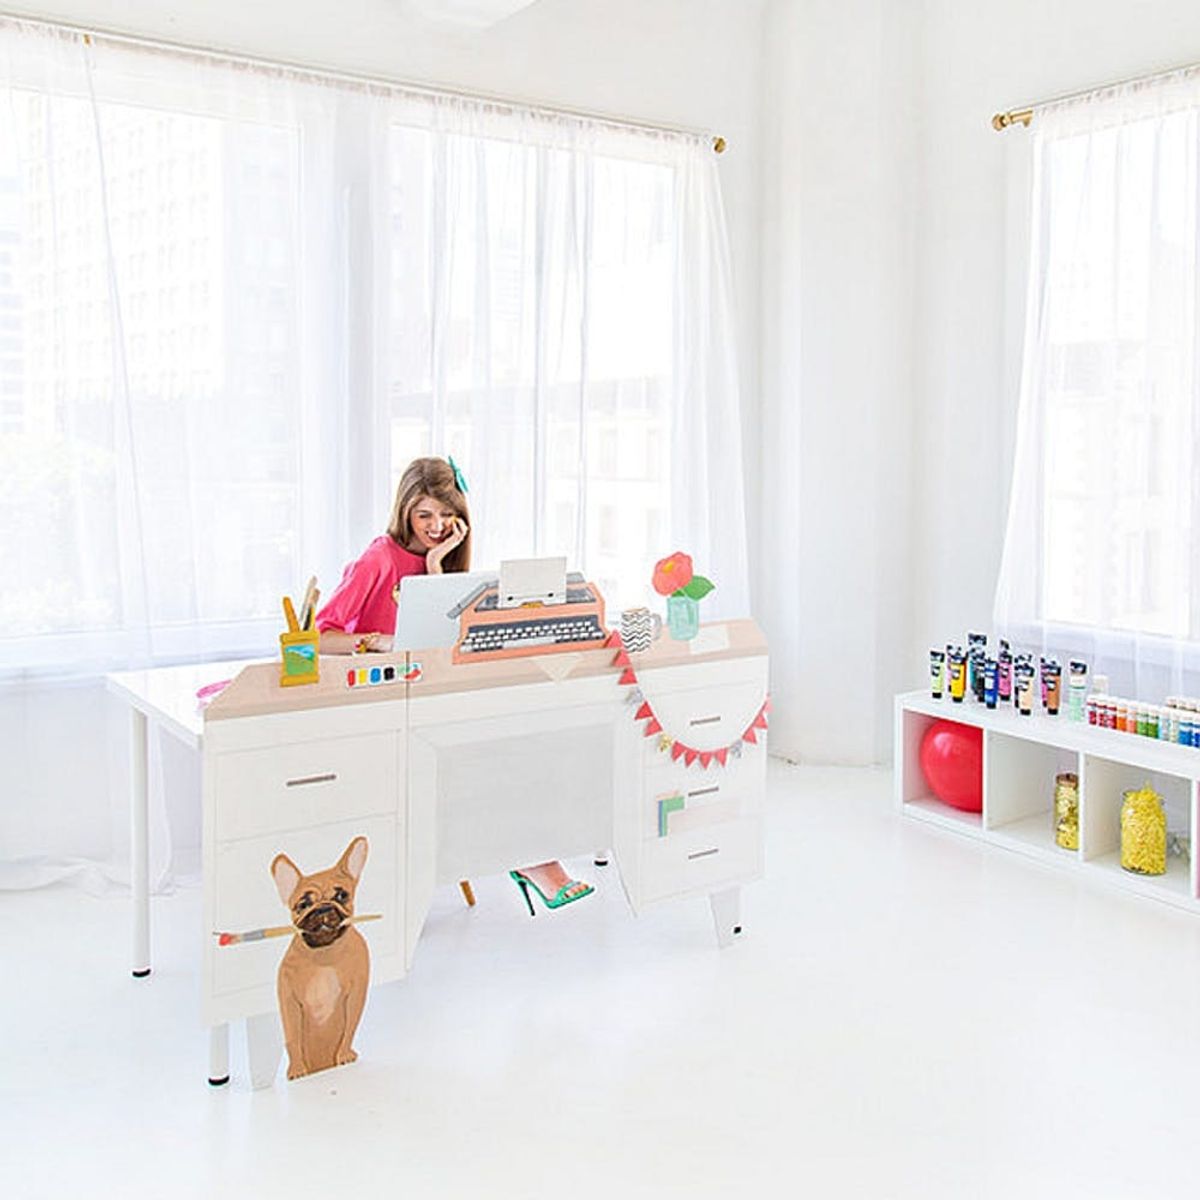 Home Office Inspo from 10 of Our Favorite Bloggers